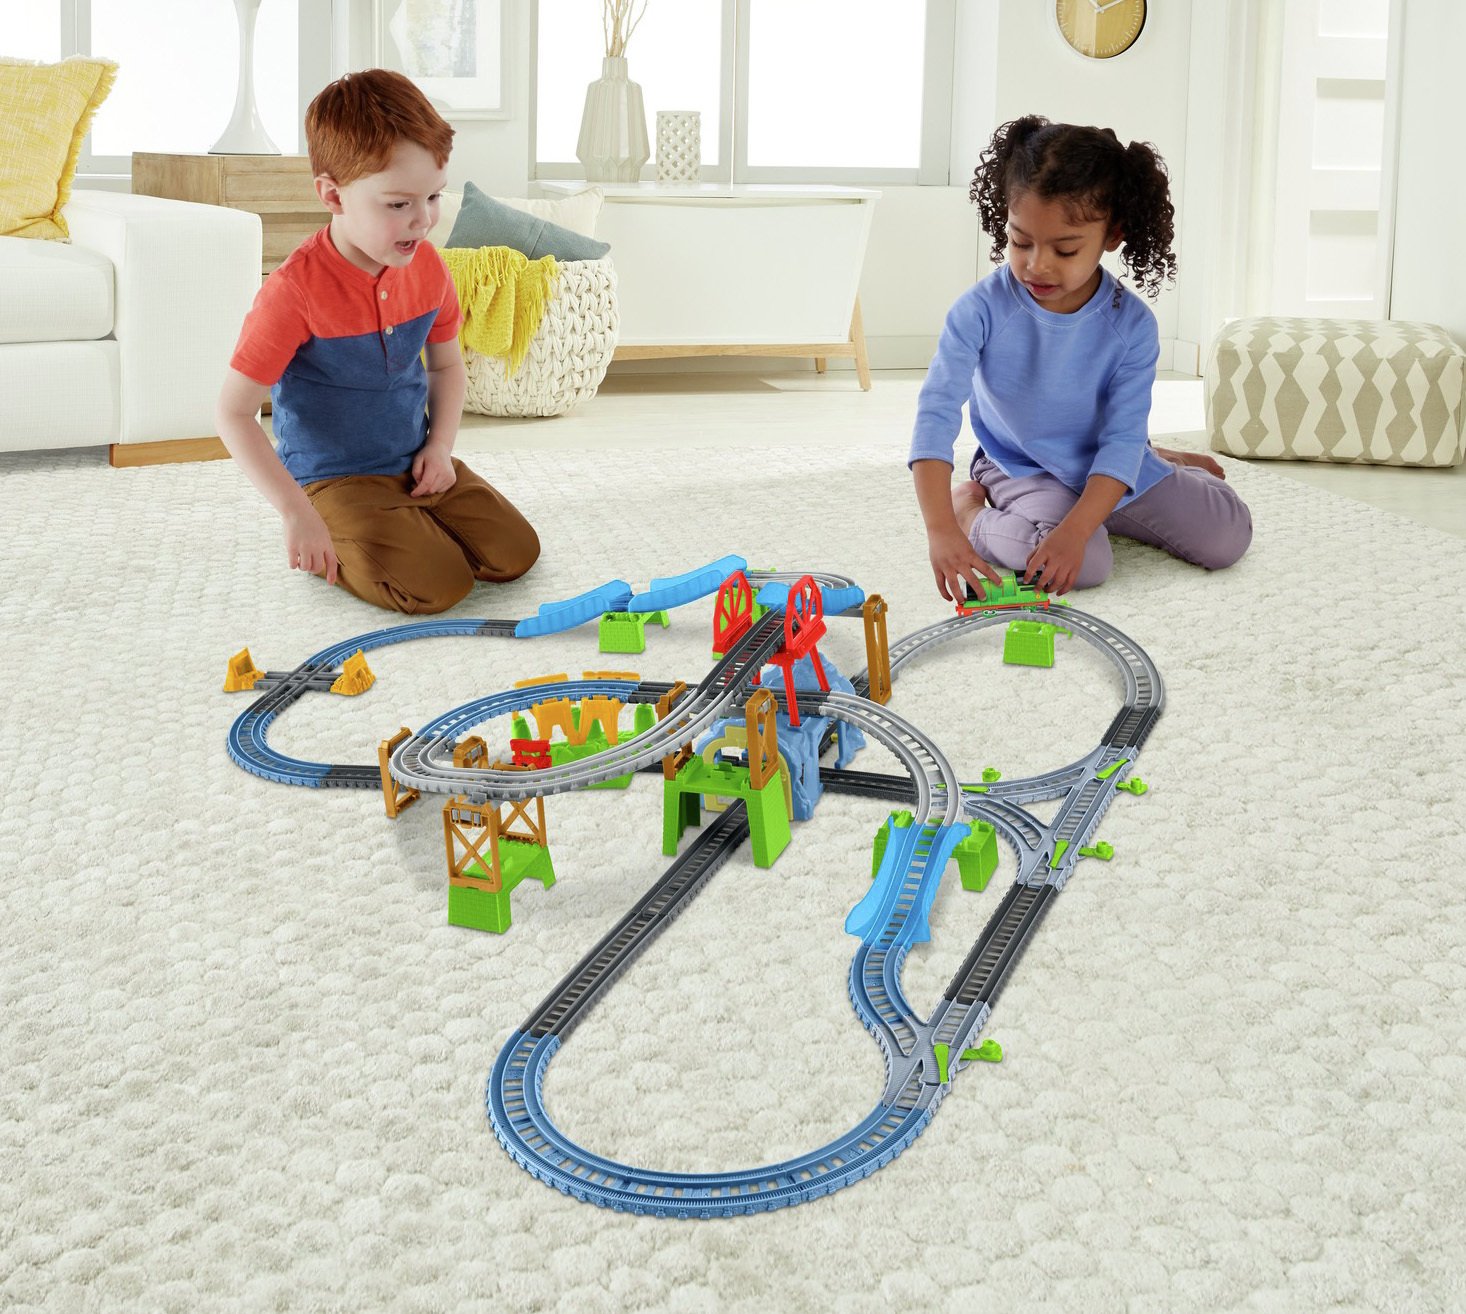 Thomas & Friends TrackMaster 6-in-1 Set Review